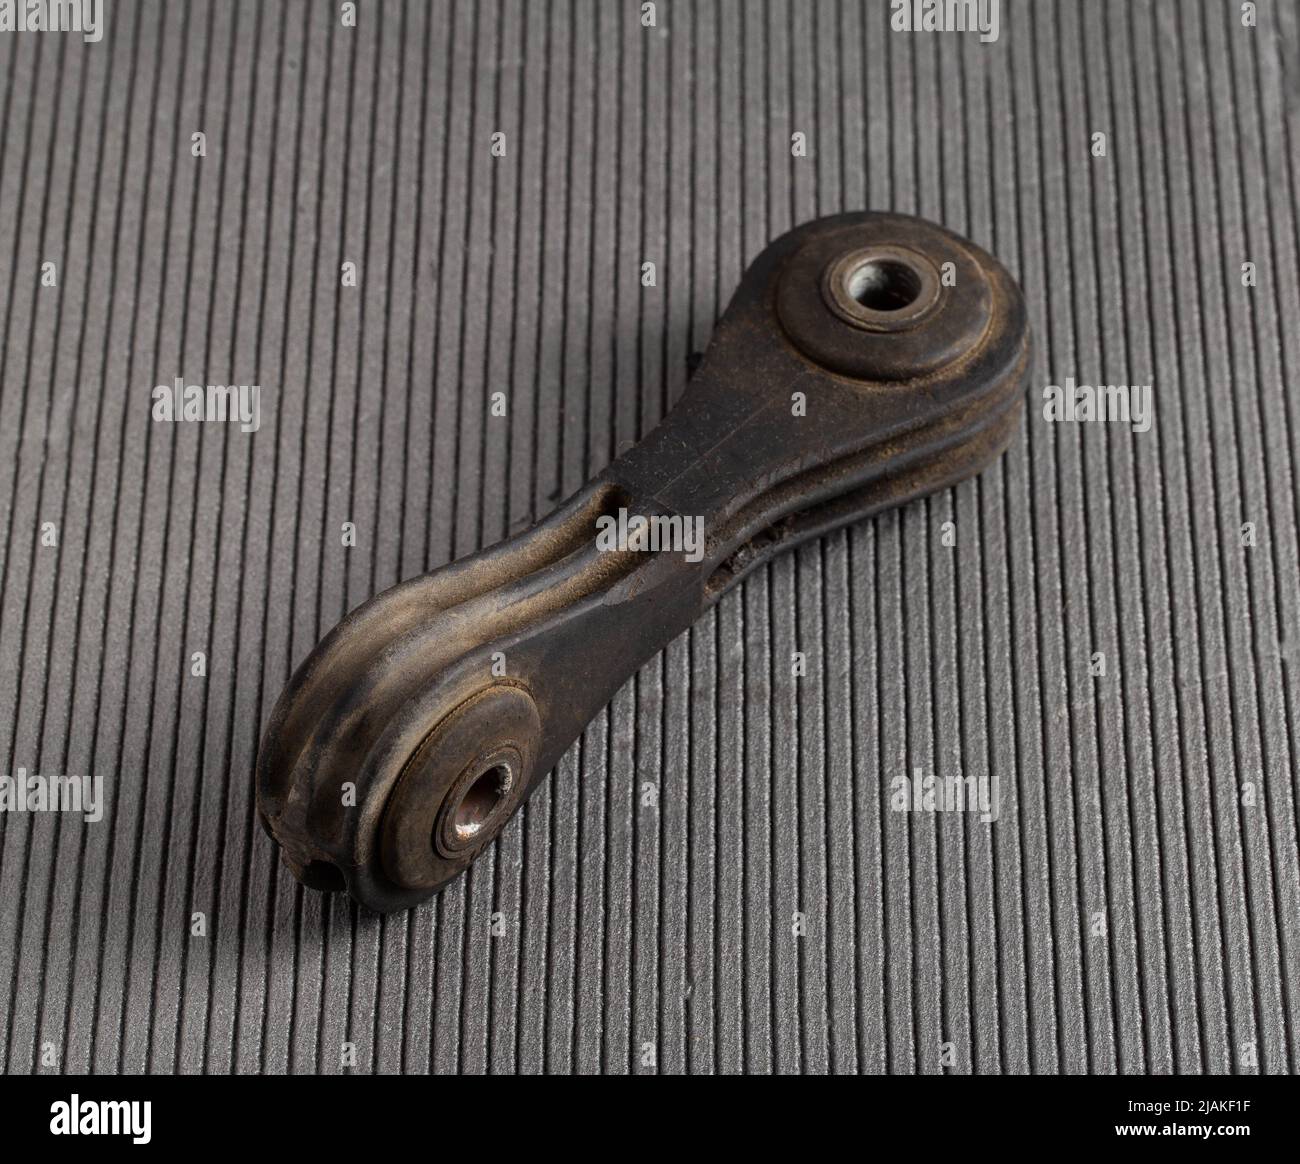 Spare part from car suspension, stabilizer link Stock Photo - Alamy